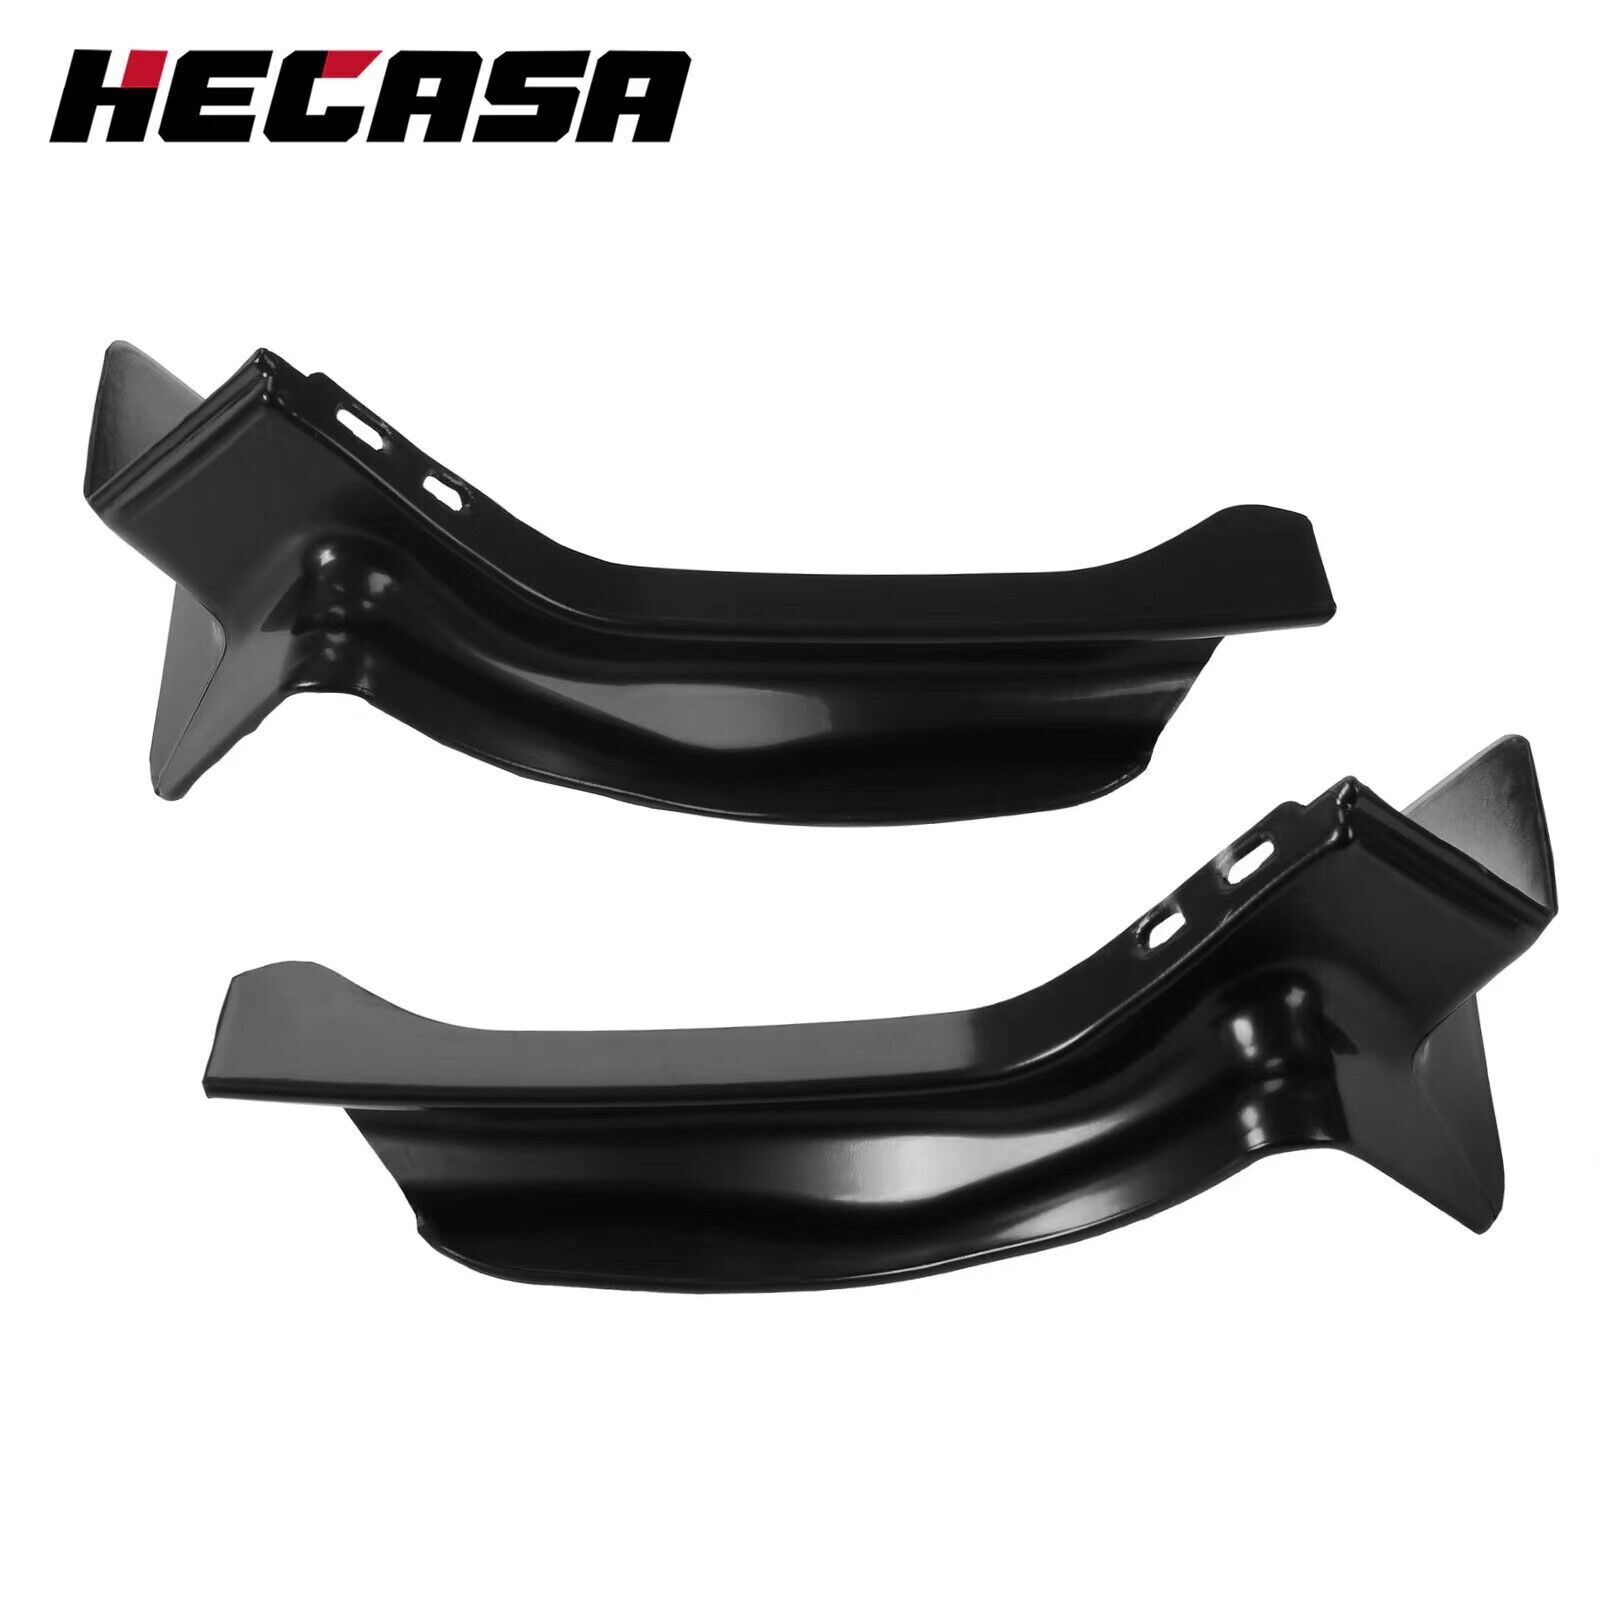 For Chevy Caprice 1975-1976 Pair LH RH Rear Quarter Bumper Fillers